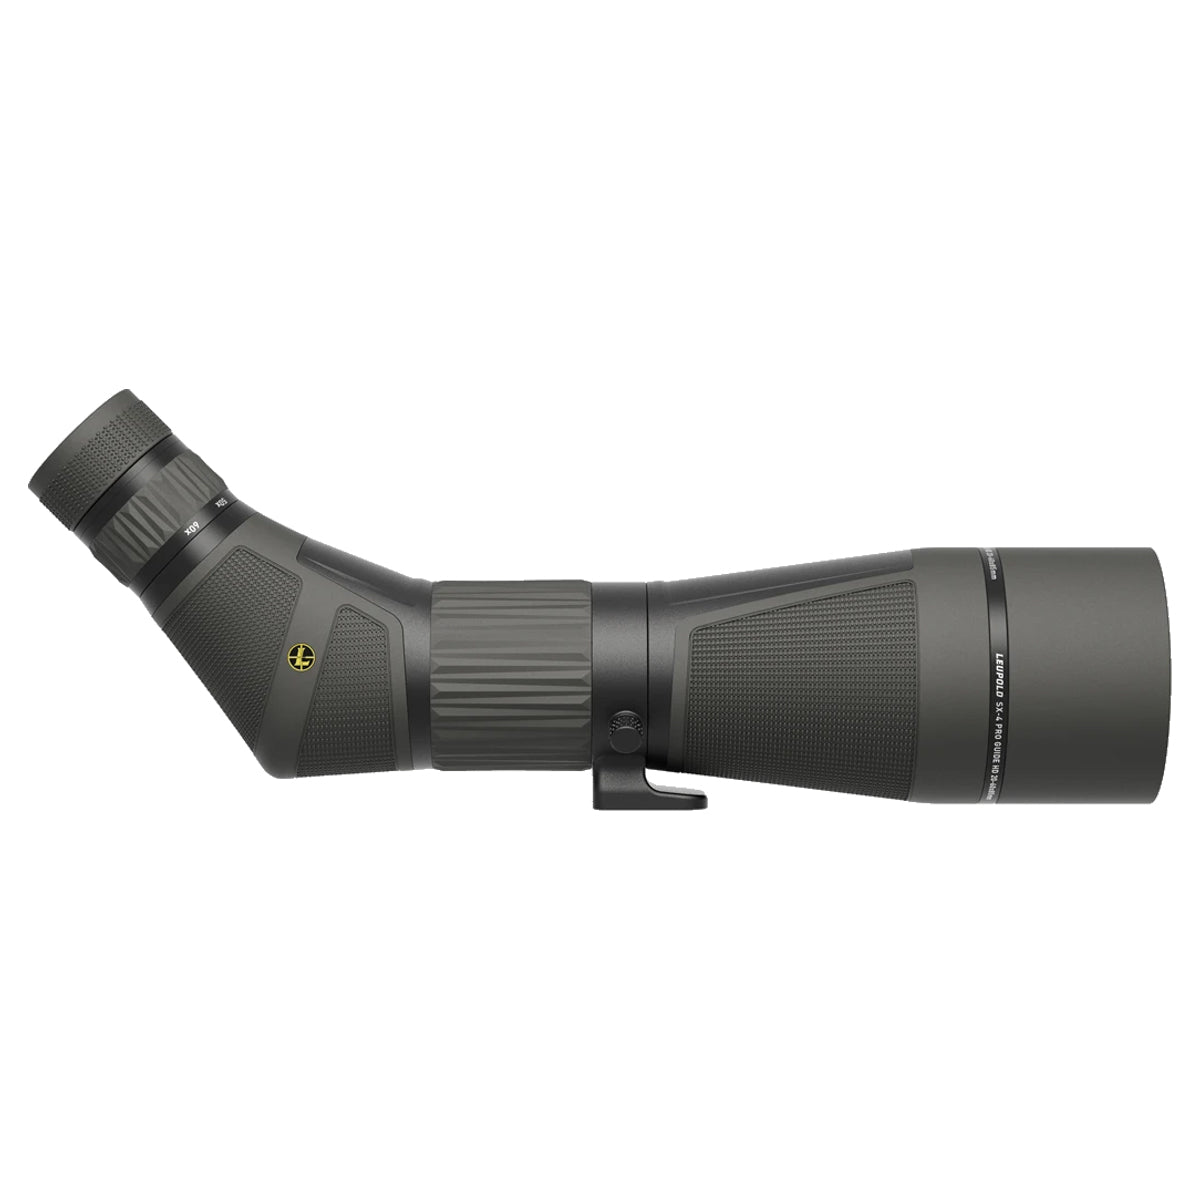 Leupold SX-4 Pro Guide HD 20-60x85mm Angled Spotting Scope in  by GOHUNT | Leupold - GOHUNT Shop